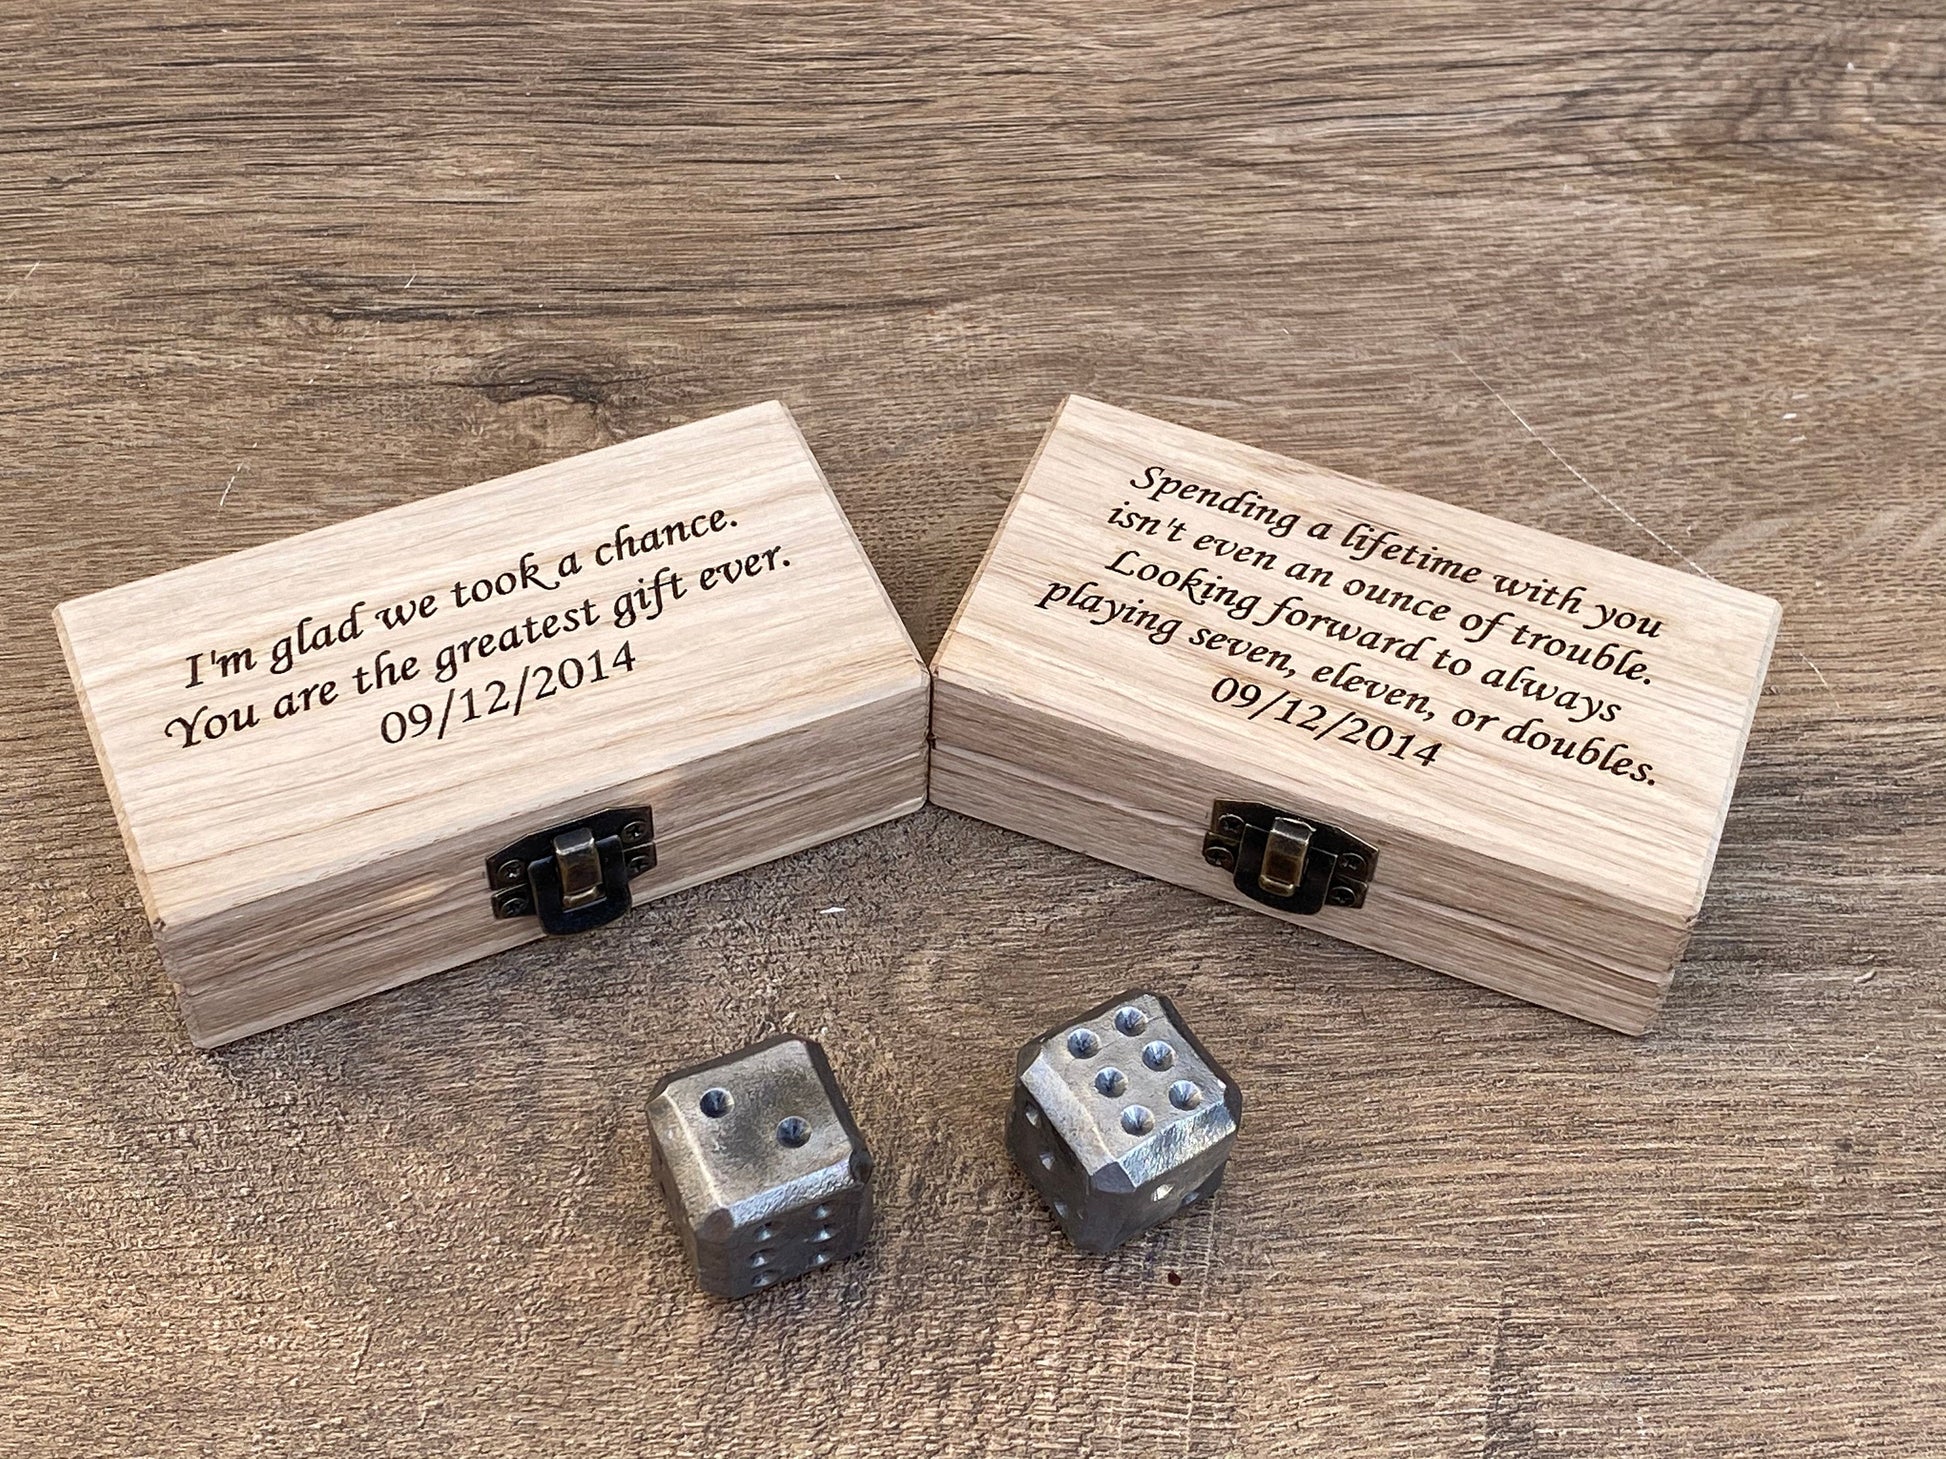 6th anniversary, iron dices, iron gift, iron anniversary, set of dices, custom dice, gambling dice, gaming dice, dice games, tabletop game